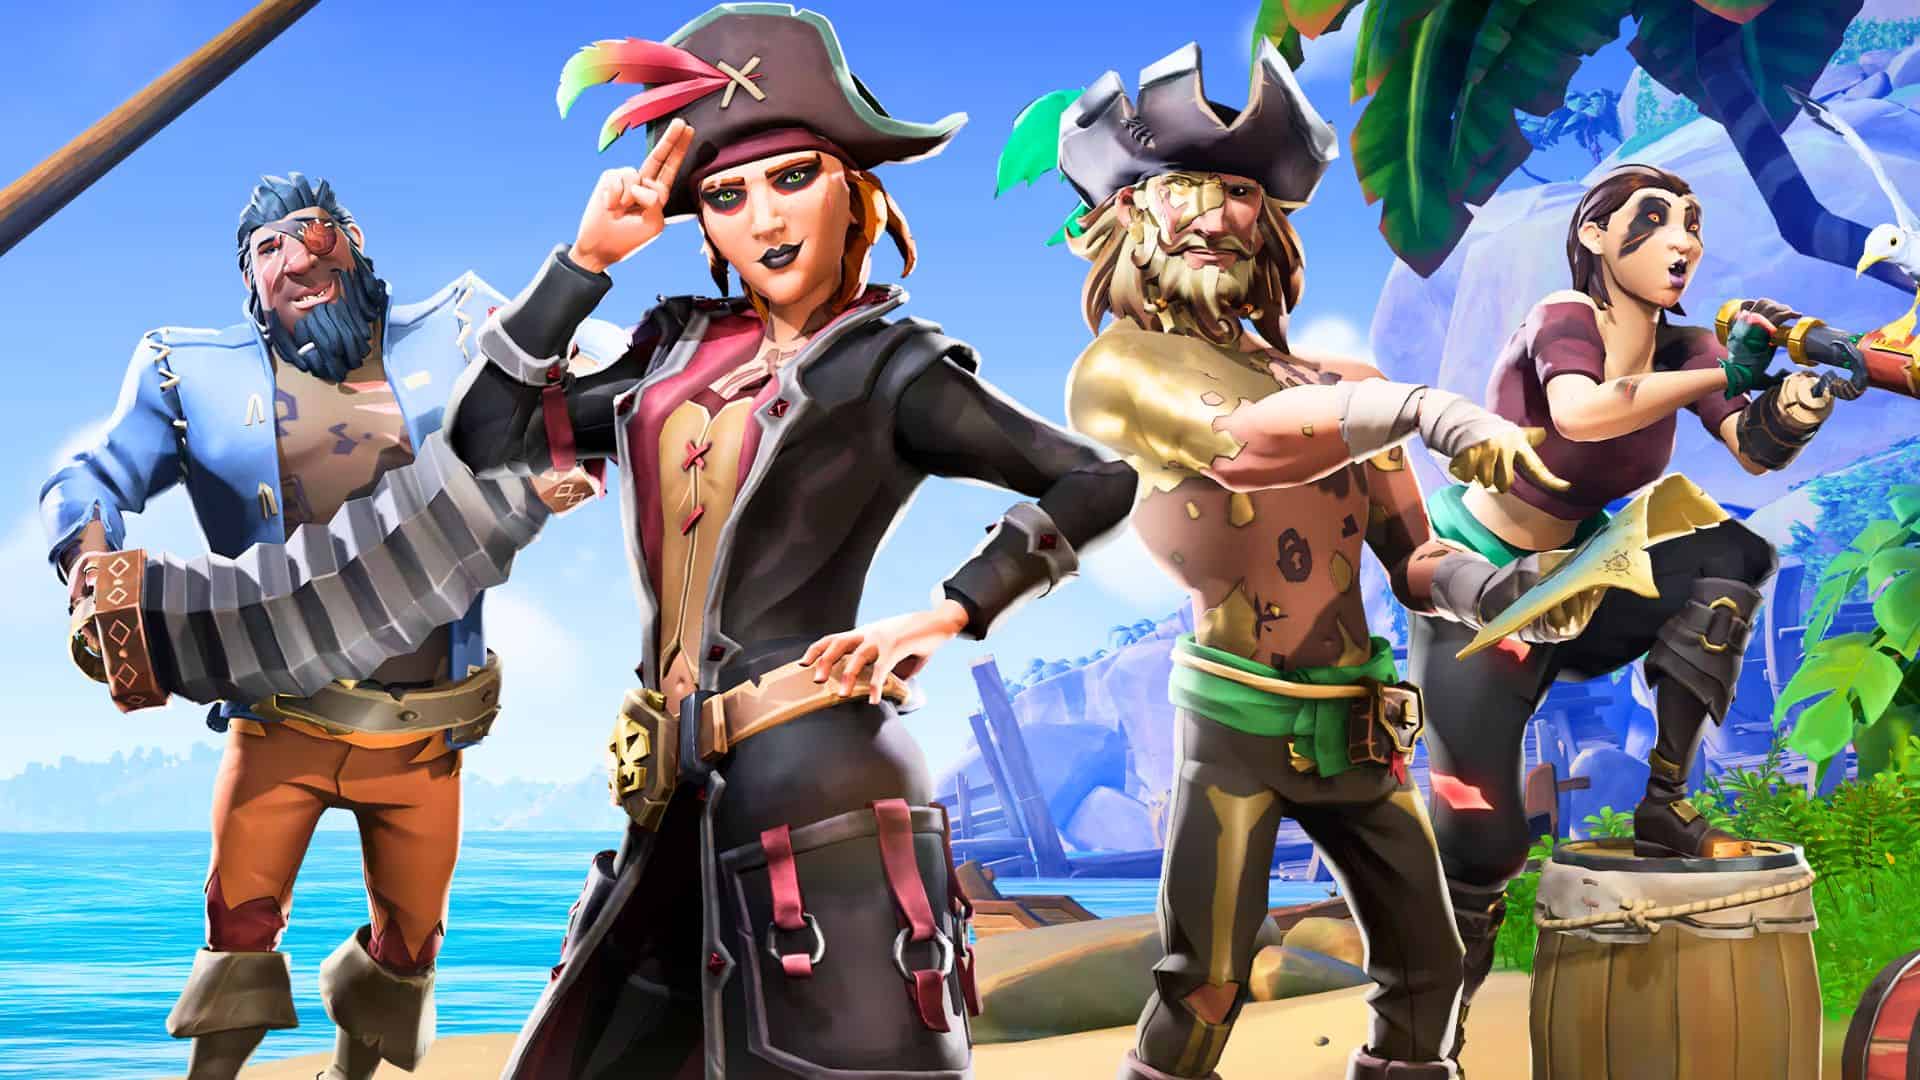 Sea of Thieves closed beta PS5 release date, start time, rewards and how to preload